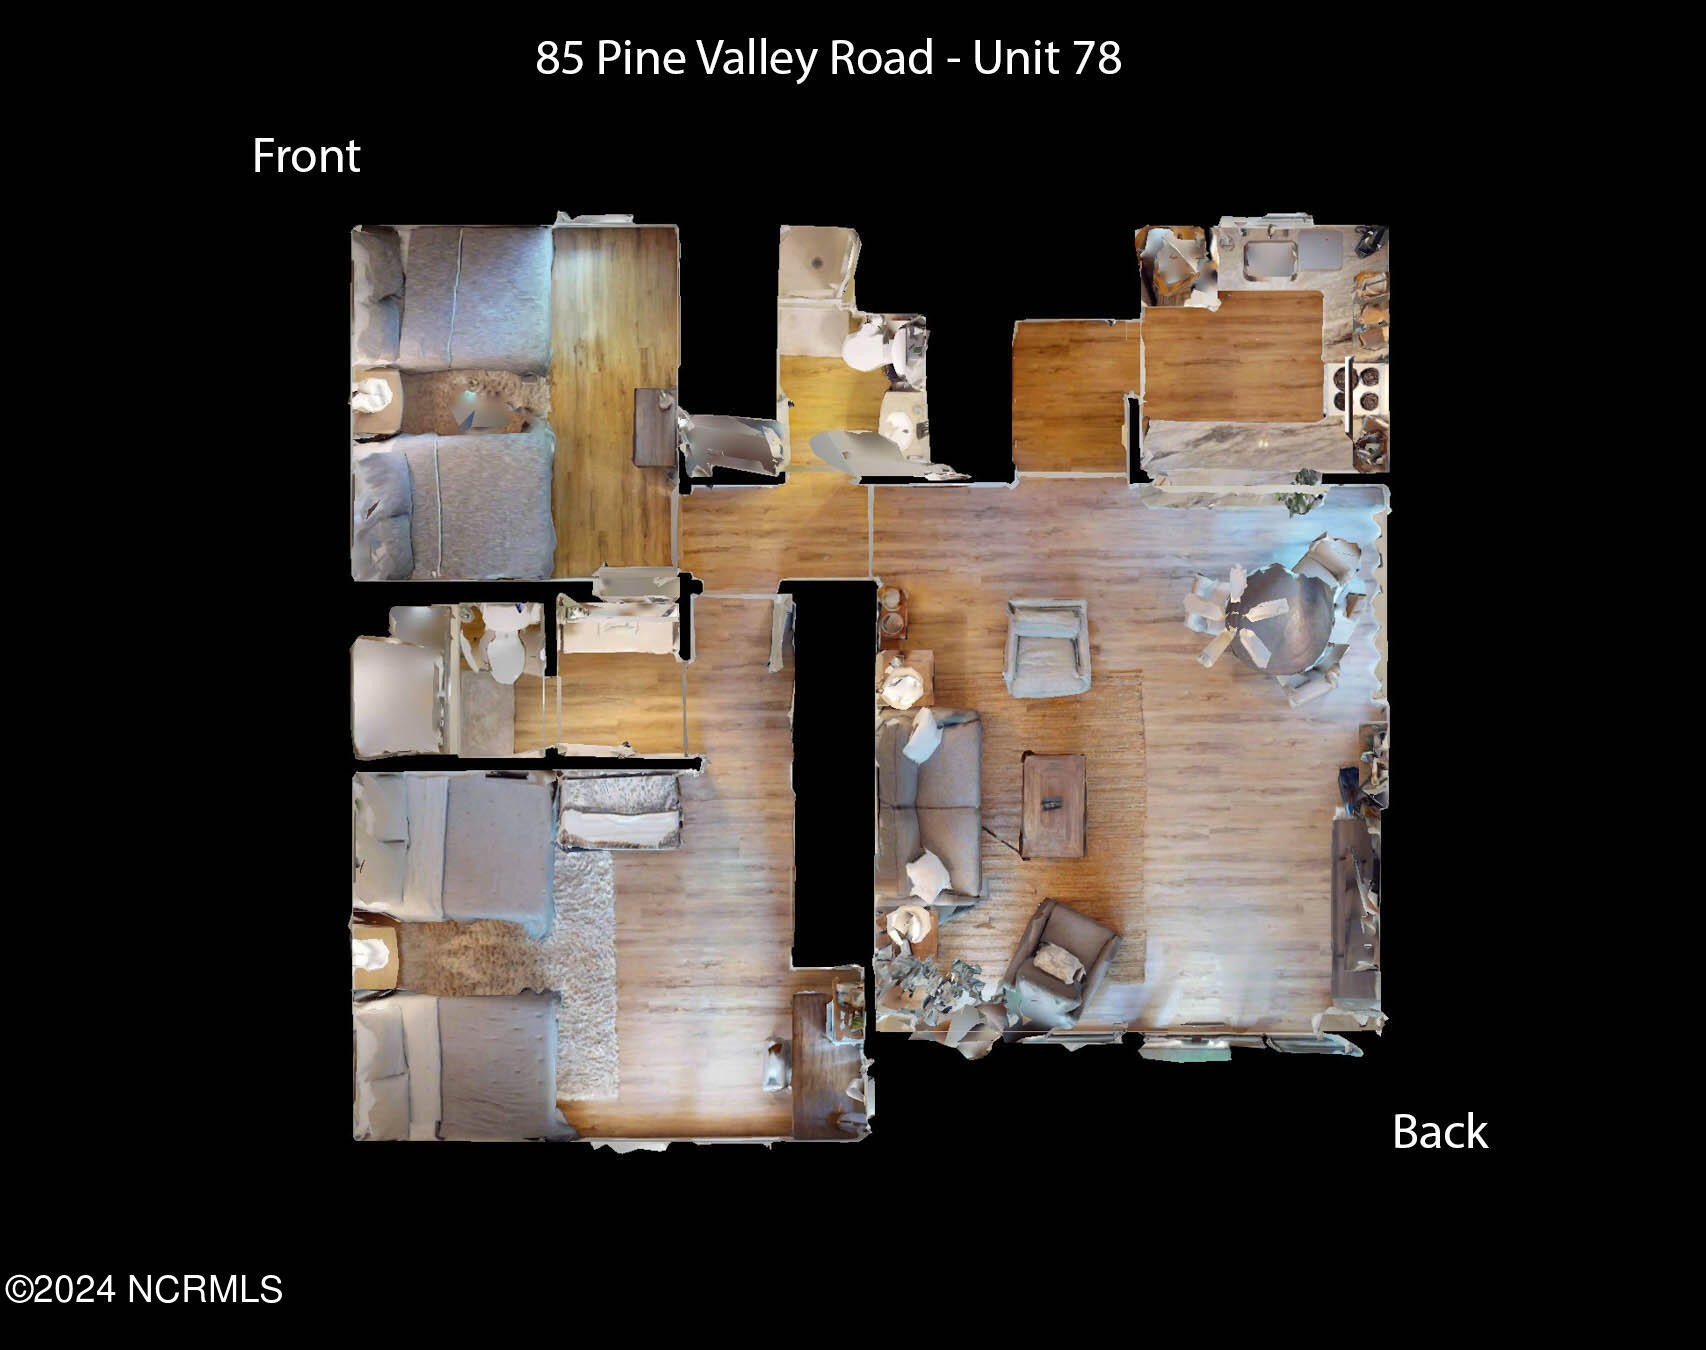 20. 85 Pine Valley Road